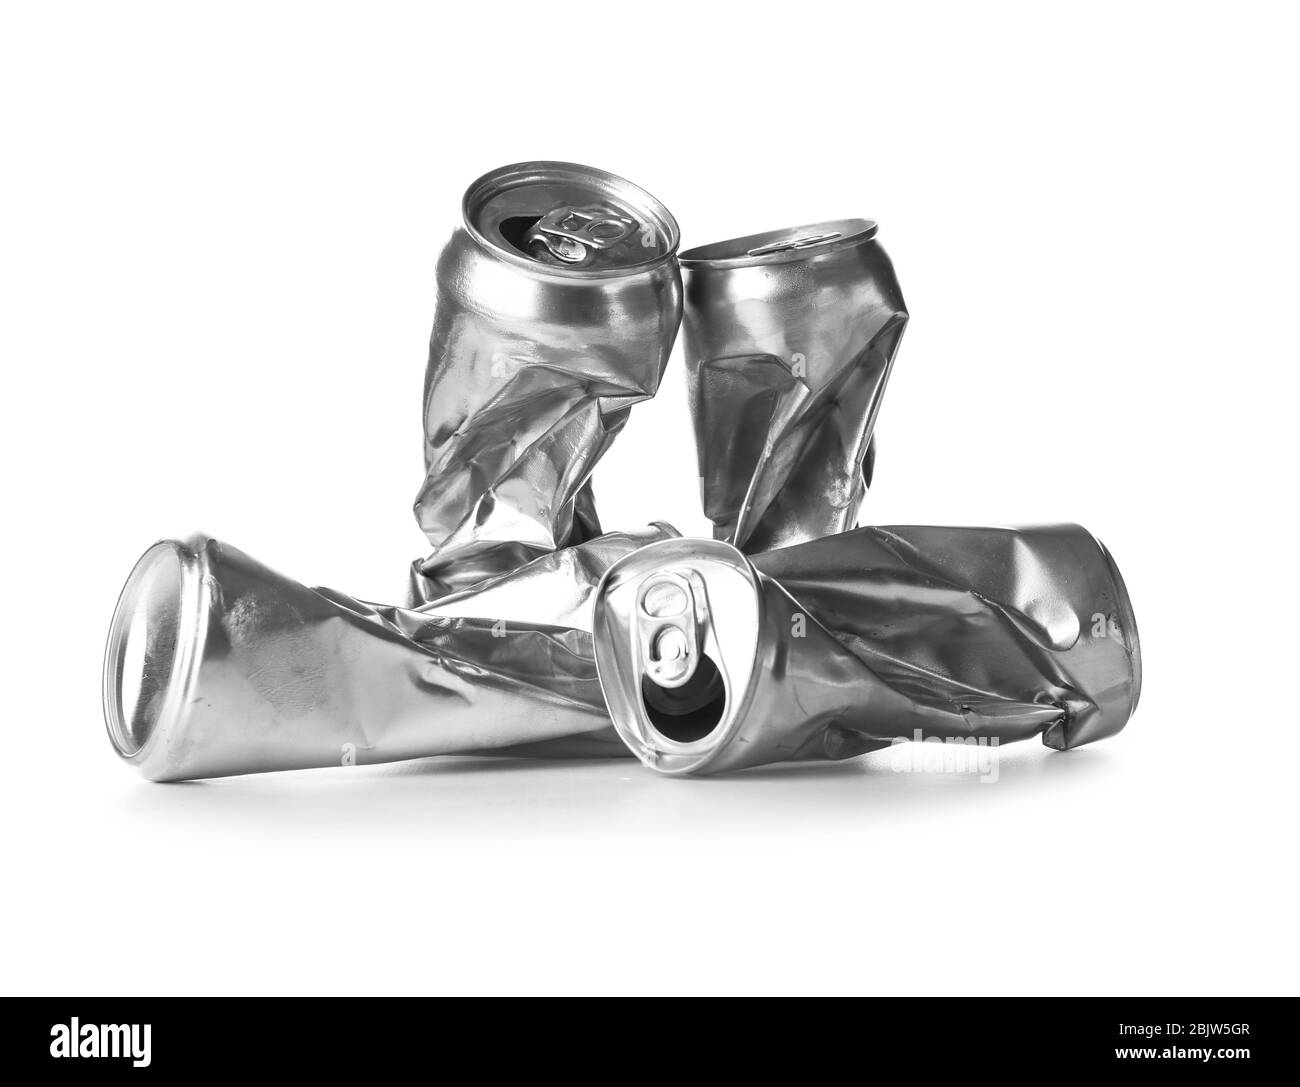 Beer cans to be recycled at Black and White Stock Photos & Images - Alamy